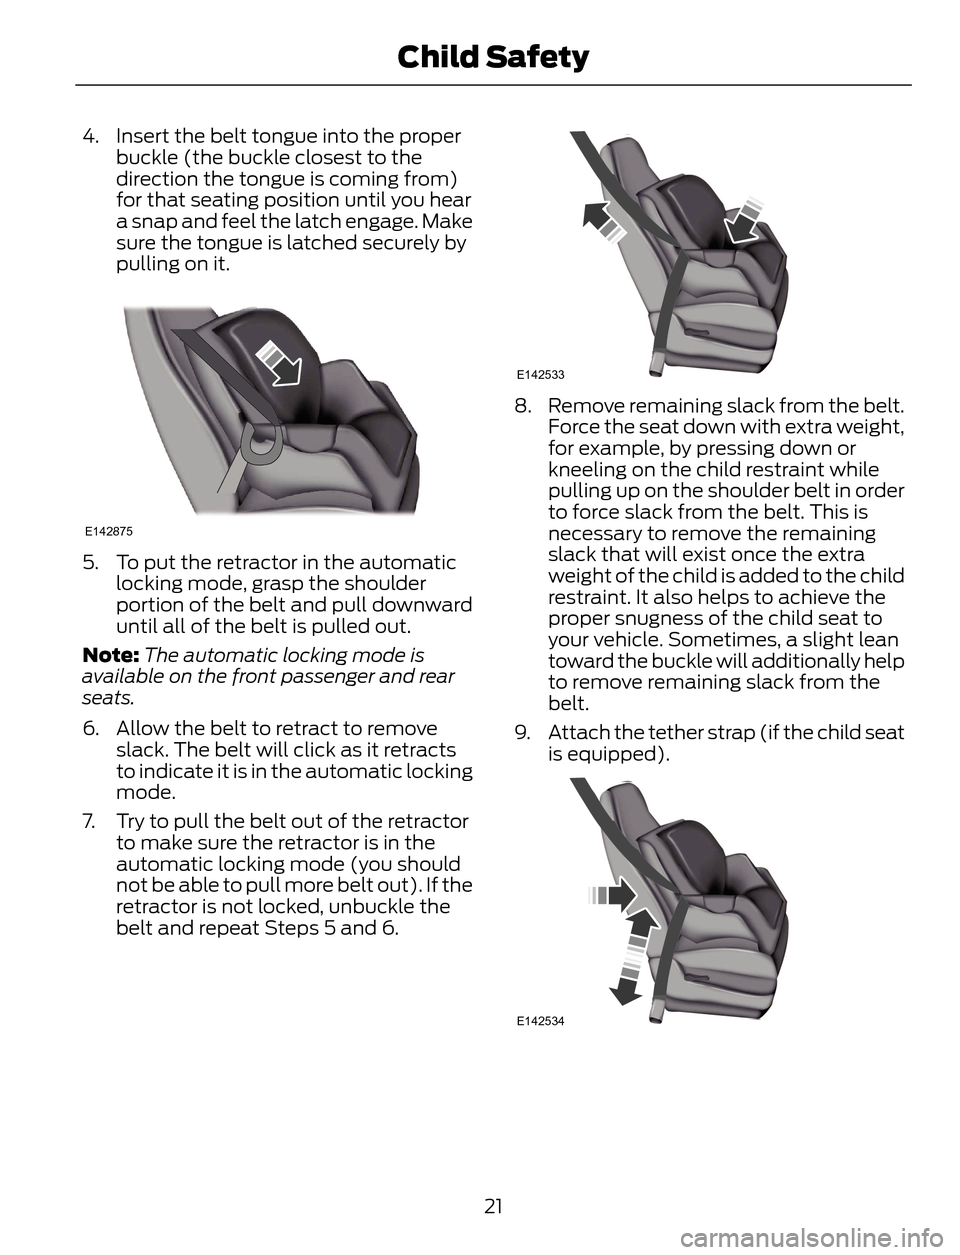 FORD ESCAPE 2014 3.G Owners Manual 4. Insert the belt tongue into the proper
buckle (the buckle closest to the
direction the tongue is coming from)
for that seating position until you hear
a snap and feel the latch engage. Make
sure th